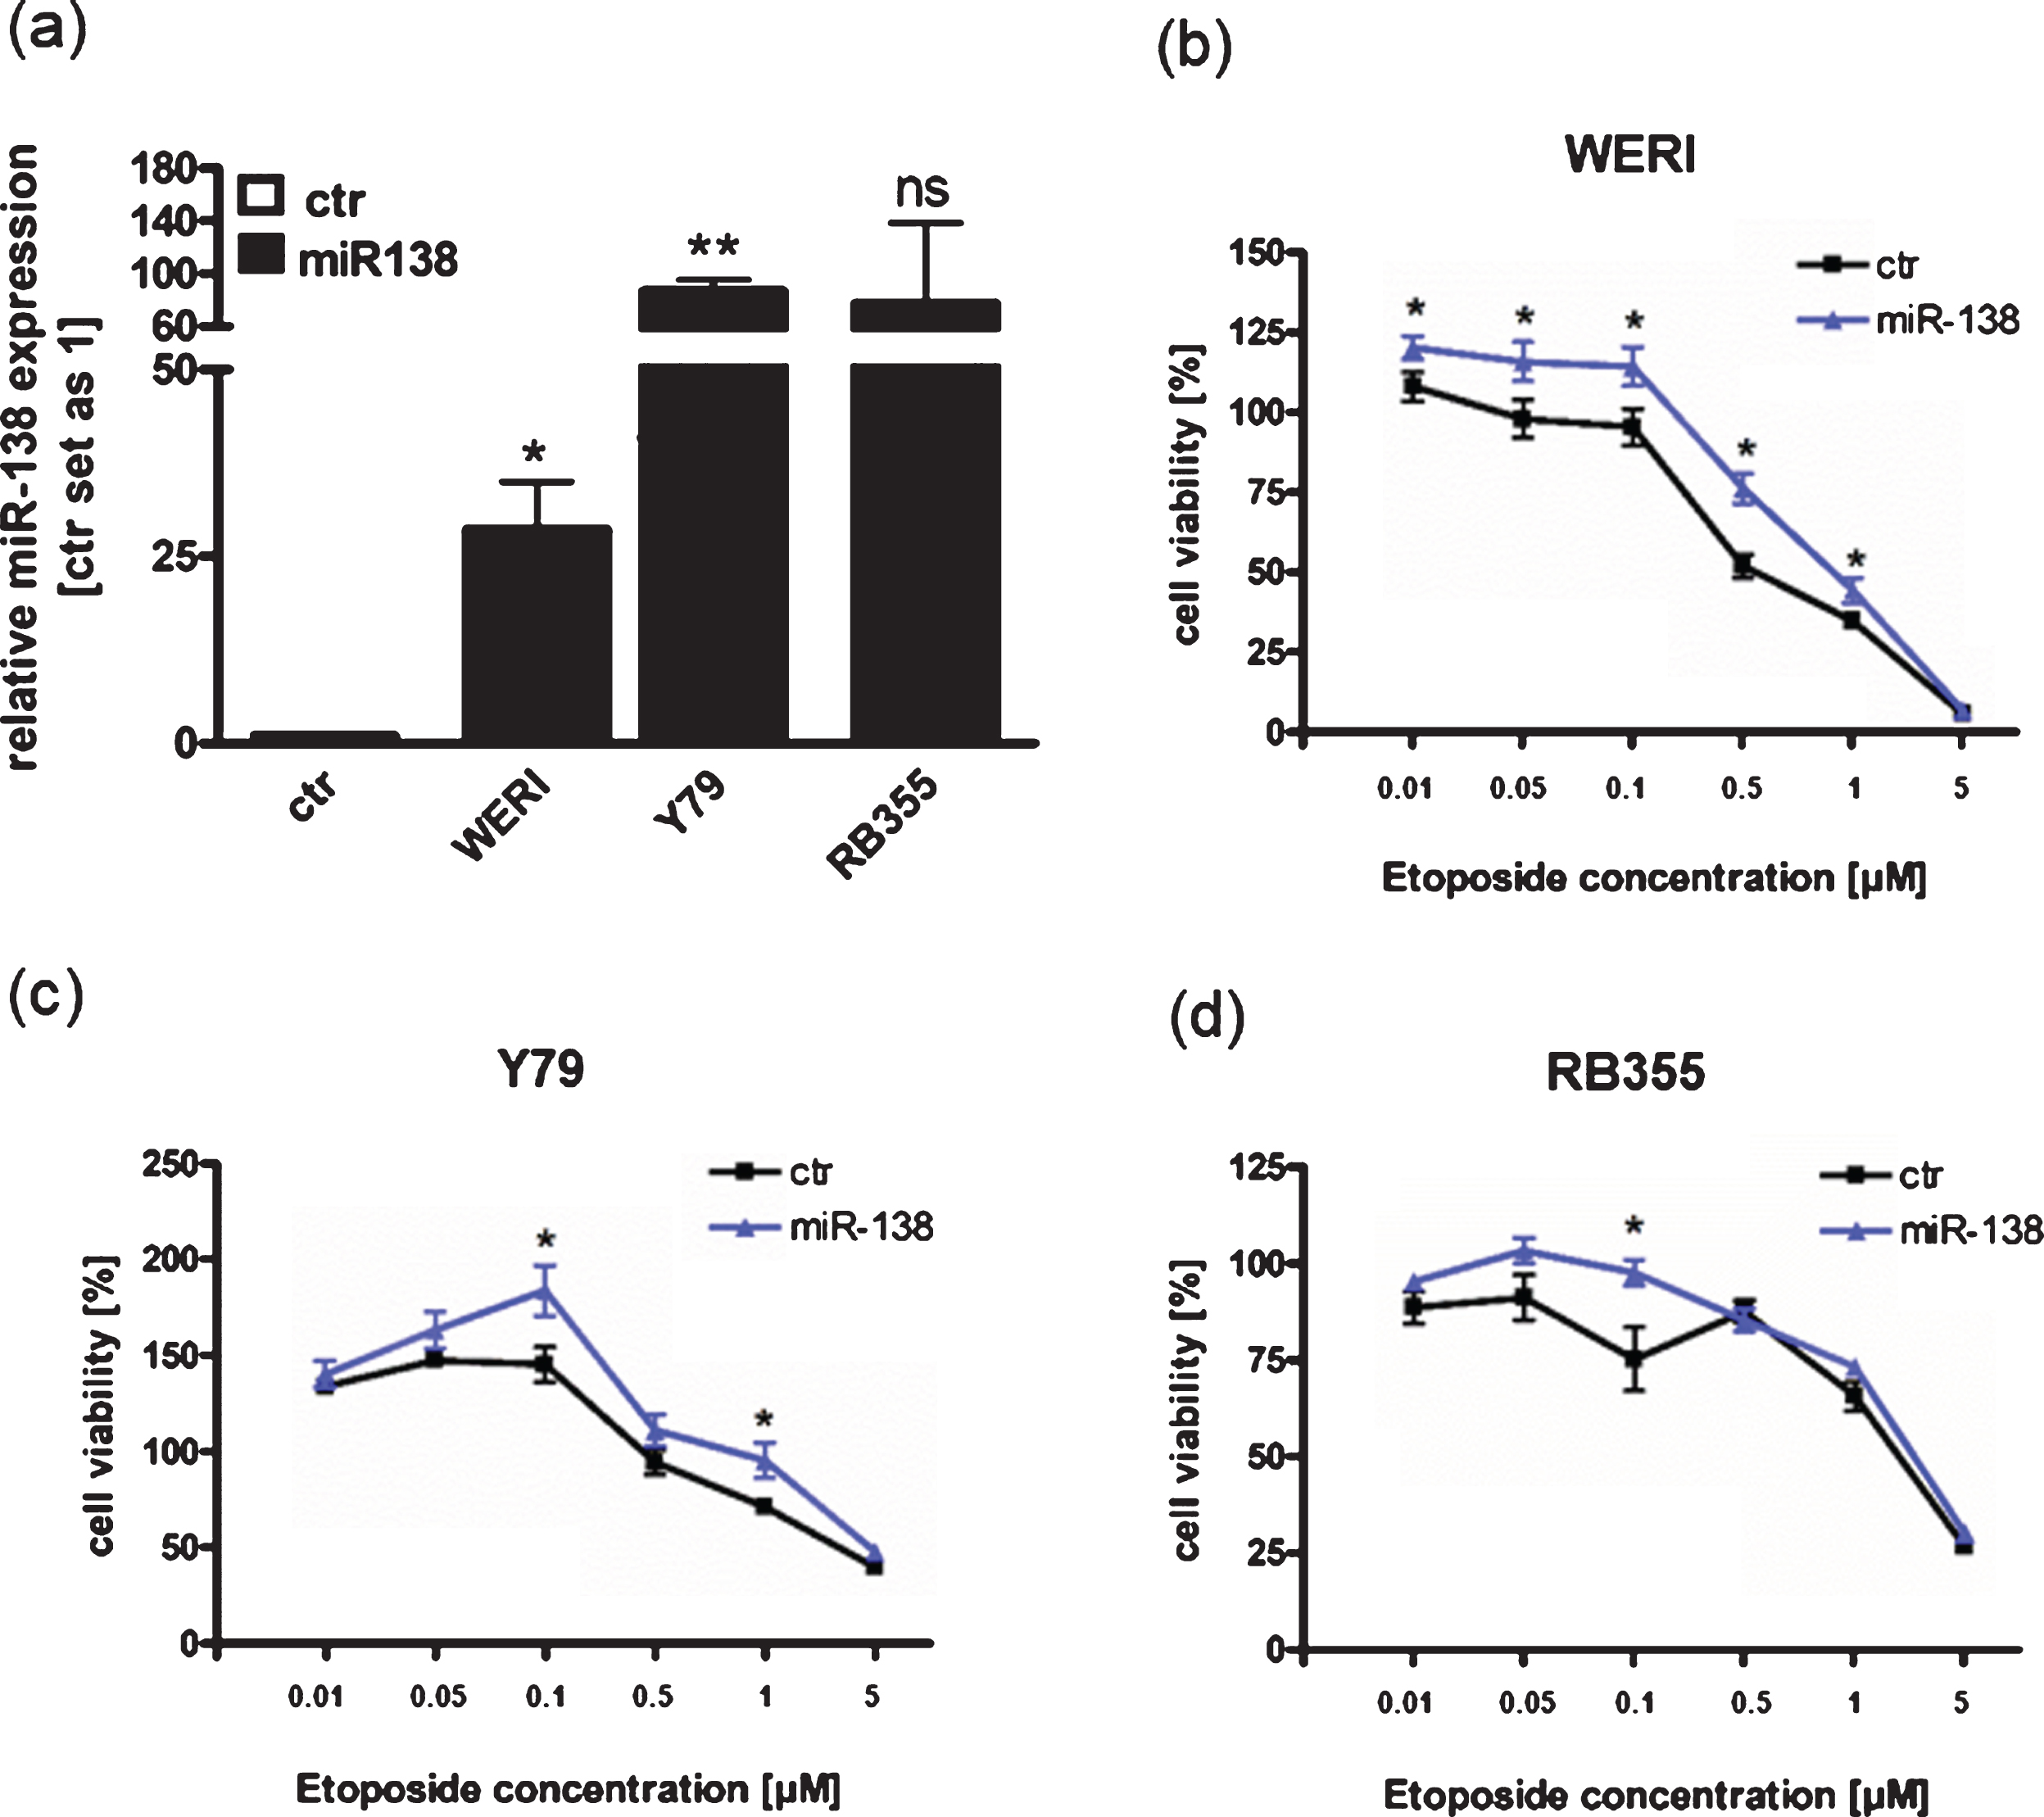 MiR-138 overexpression partially enhances cell viability of RB cell lines after treatment with etoposide. (a) Quantitative Real-time PCR analysis of miR-138 expression in WERI-Rb1 (WERI), Y79 and RB355 RB-cells compared to control cells (ctr) after transient transfection of miR-138 vector. (b) MiR-138 overexpression in WERI-Rb1 RB cells leads to significantly increased cell viability after treatment with etoposide compared to control cells (ctr). (c) Compared to control cells (ctr), miR-138 overexpression in Y79 cells partially increased cell viability after treatment with individual concentrations of etoposide. (d) MiR-138 overexpression in RB355 RB cells does not increase cell viability after etoposide treatment compared to control cells (ctr). RB cells were treated with different concentrations of etoposide (0.01 –5μM) for 72 h and WST-1 assays were performed. Values are means from at least 3 independent experiments±SEM and were normalized against untreated controls. **P-value < 0.01; *P-value < 0.05; statistical differences compared to the control group calculated by Student’s t-test.